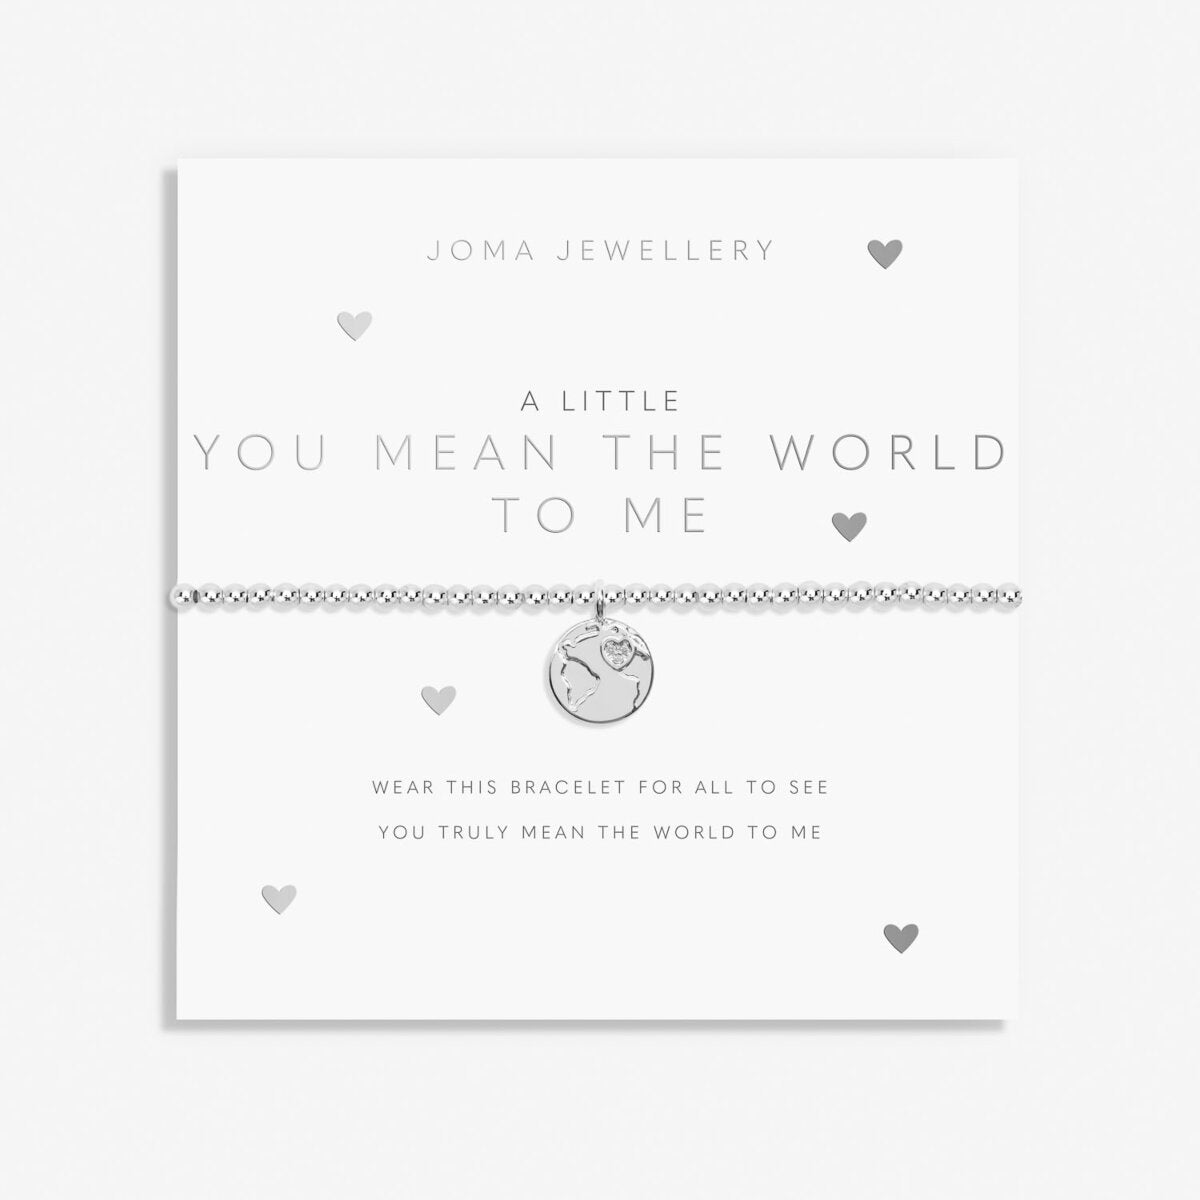 JOMA JEWELLERY | A LITTLE | YOU MEAN THE WORLD TO ME BRACELET